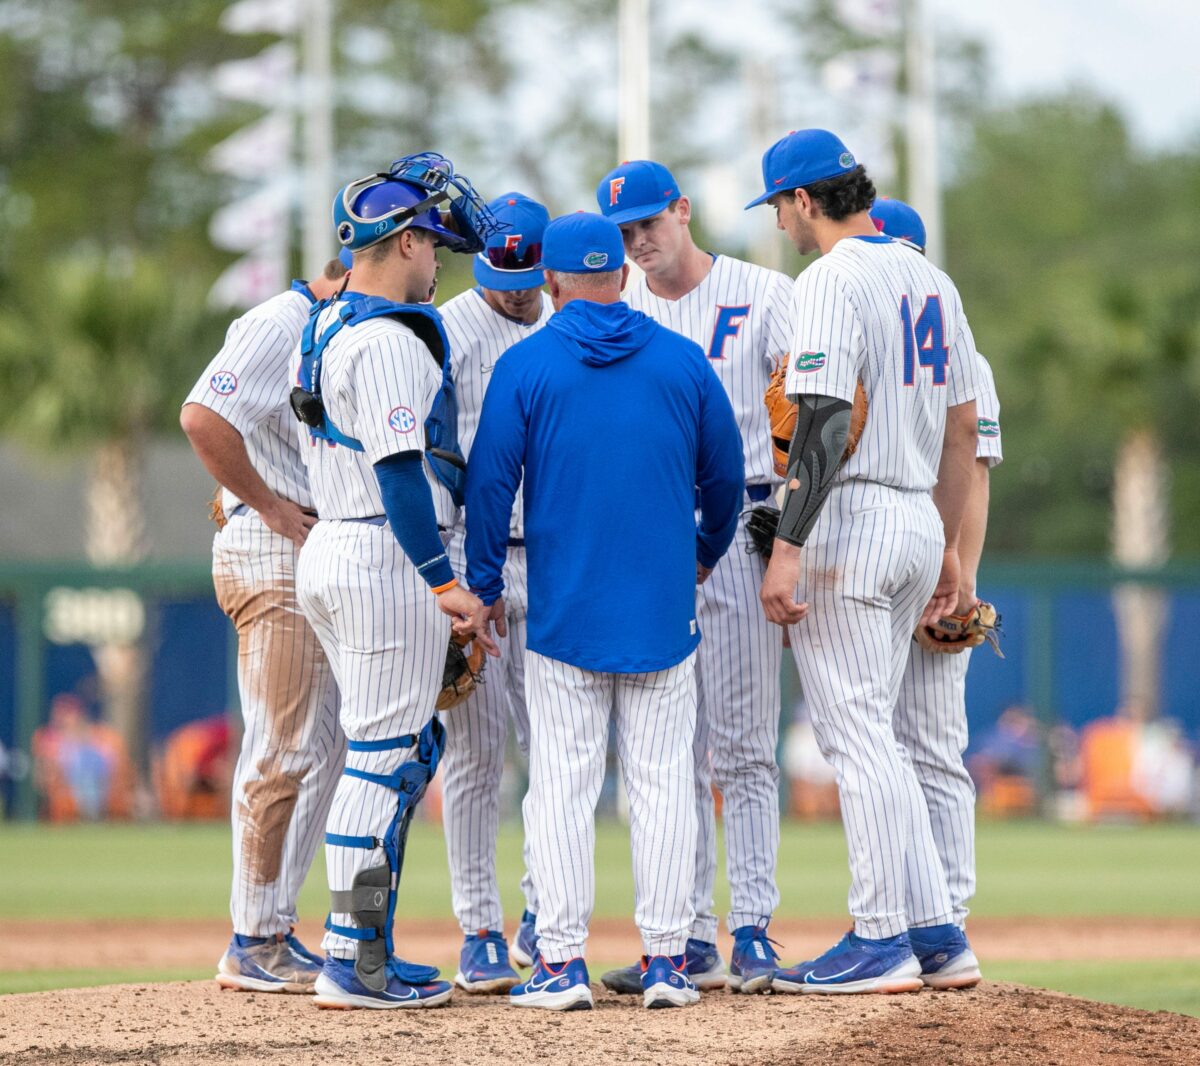 Series Preview: Florida looking to stay dominant in SEC play against Georgia